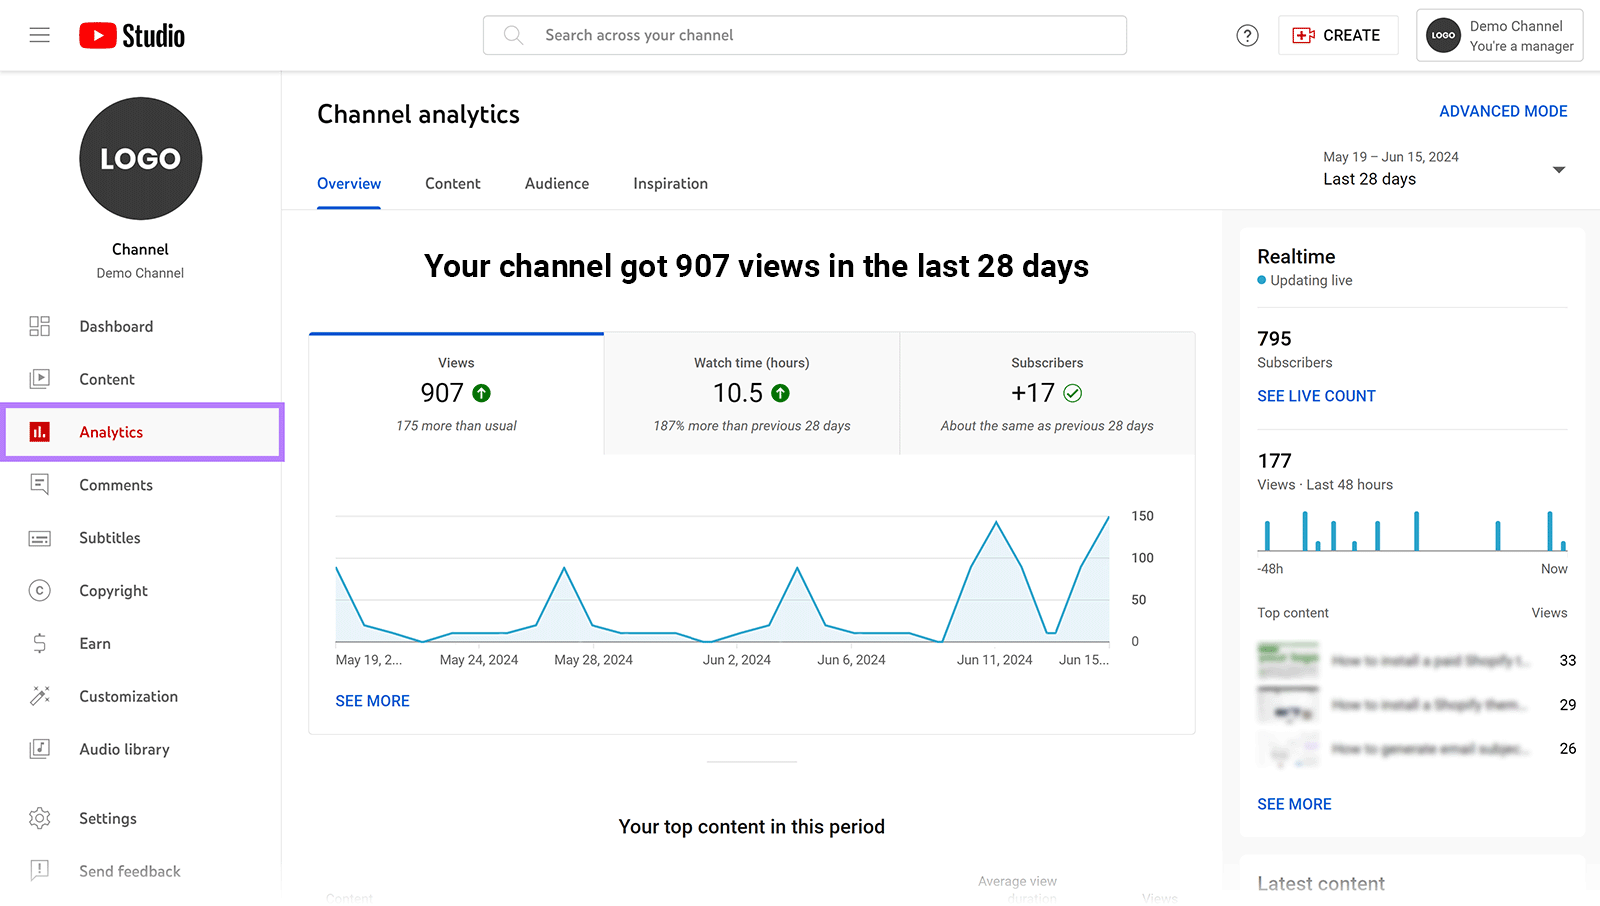 YouTube Studio dashboard with Analytics selected showing views data.